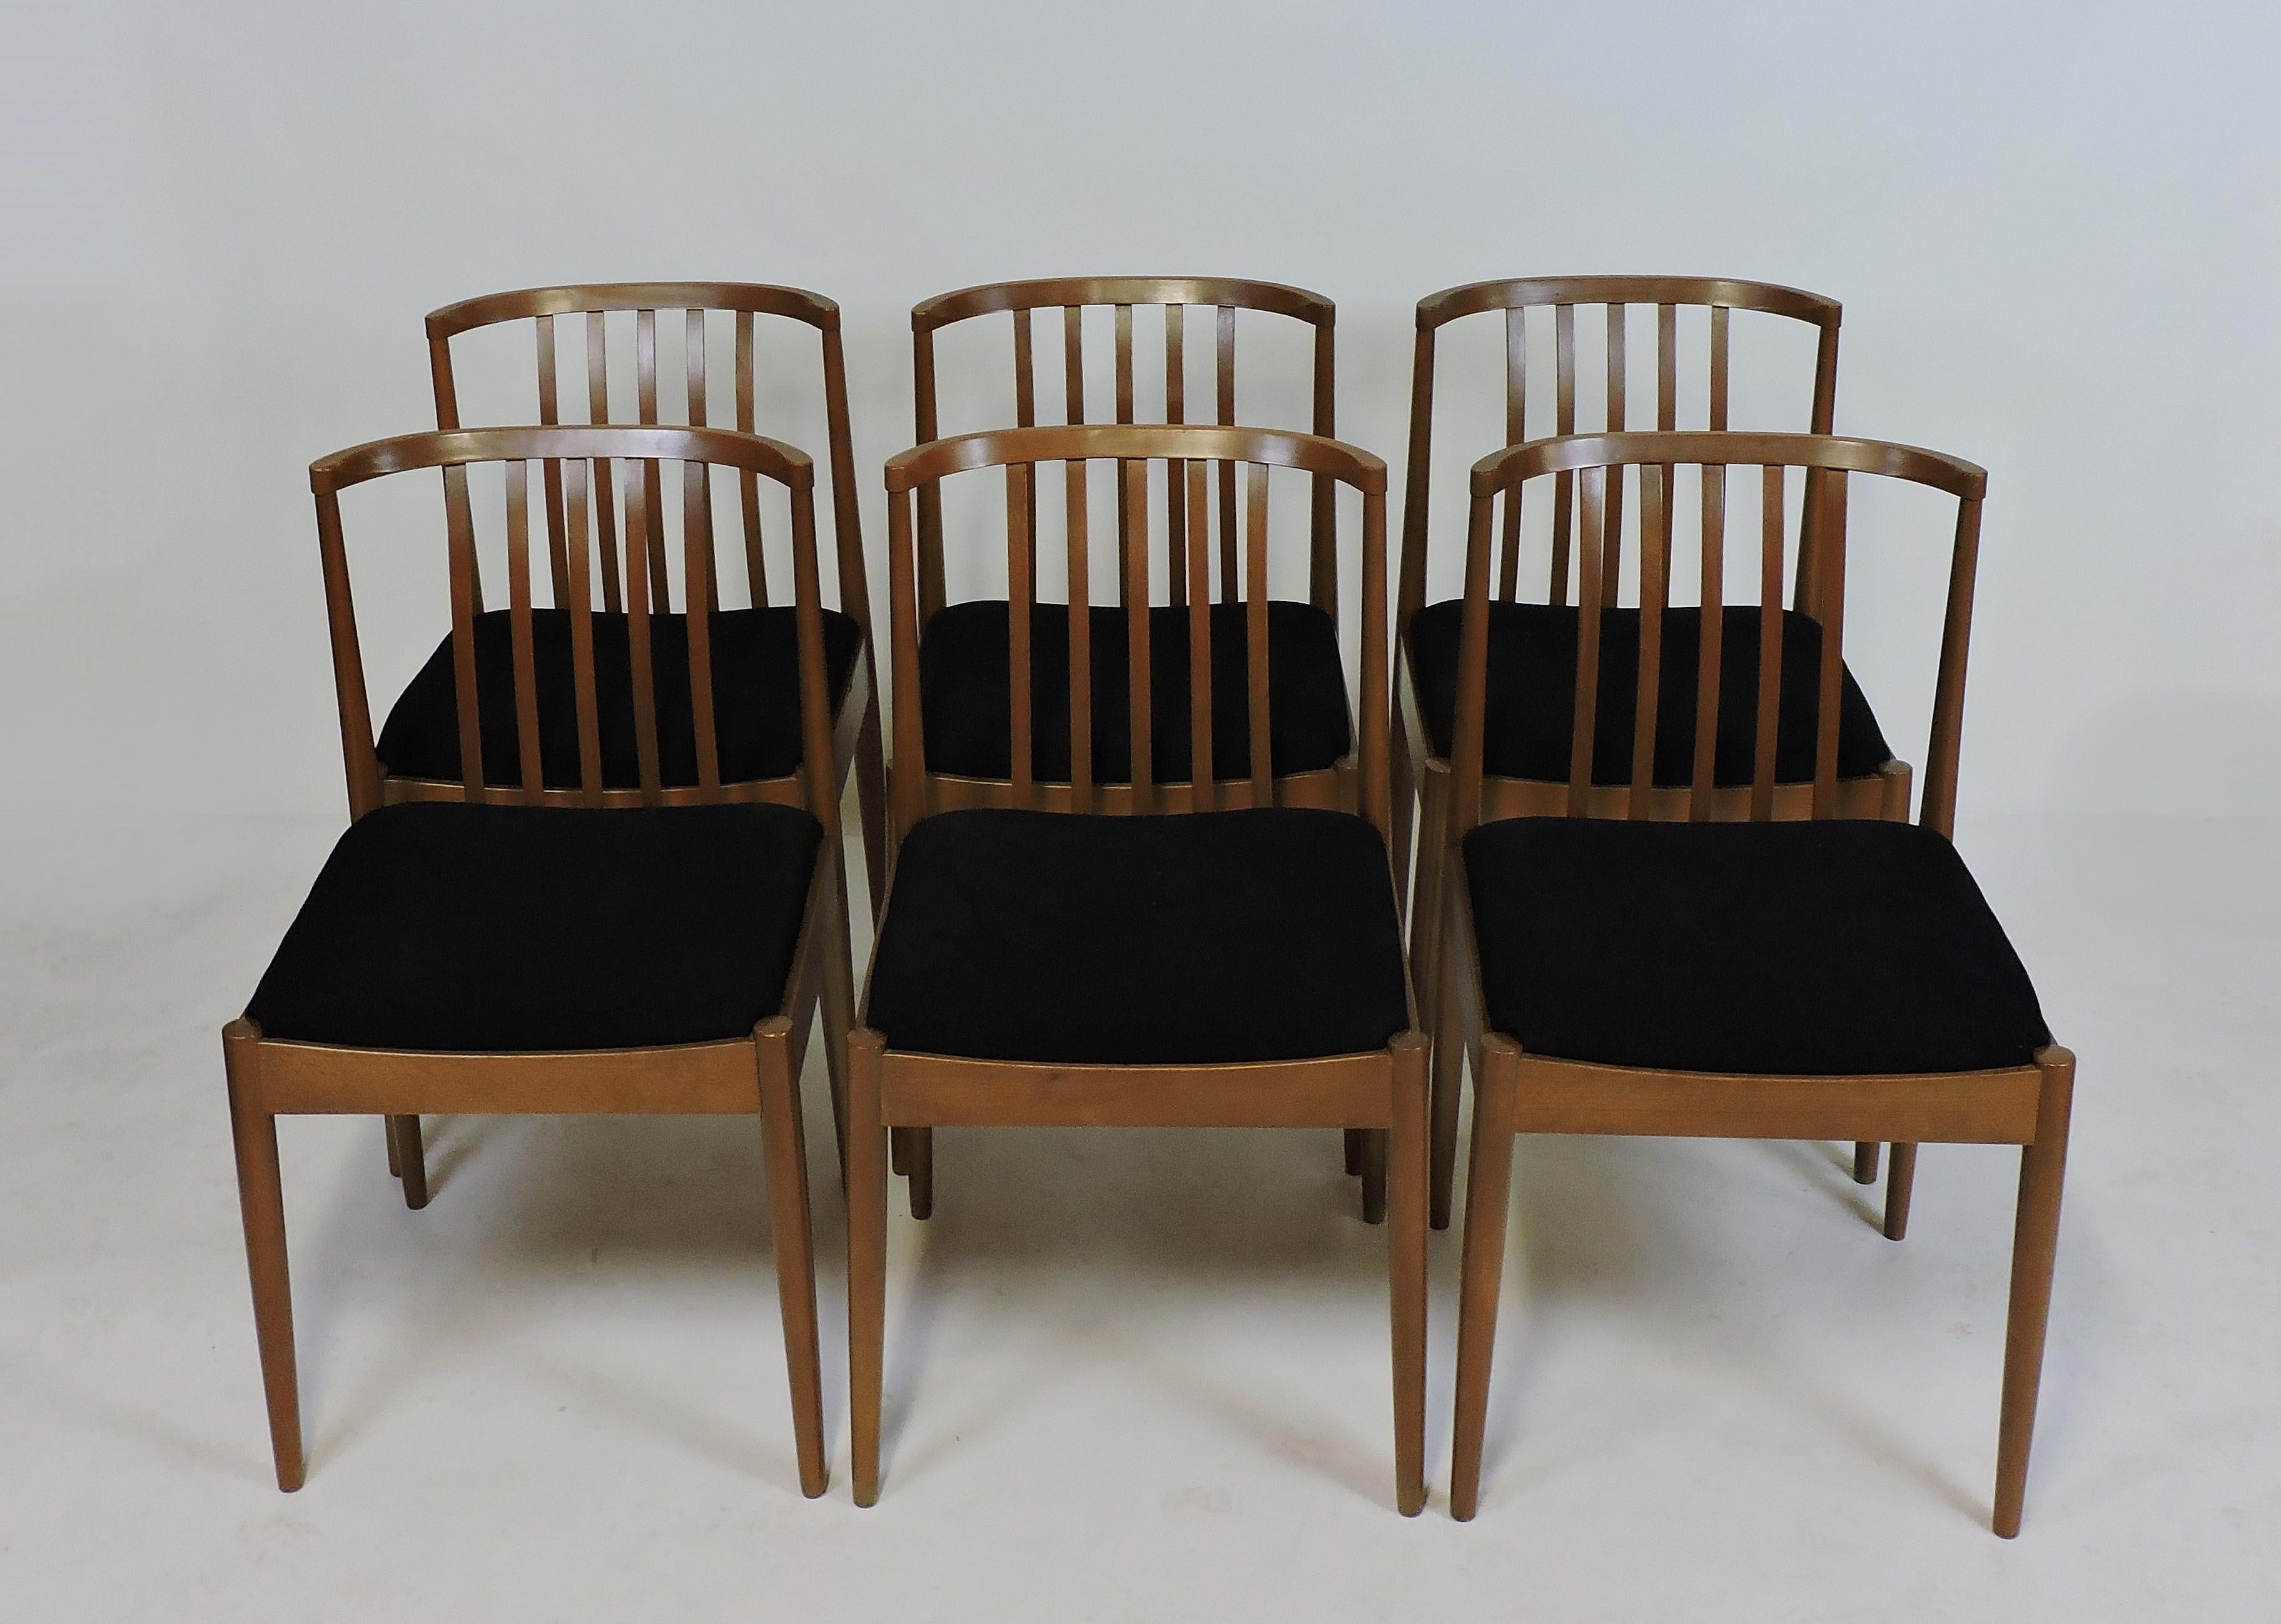 Set of six elegant and well made midcentury dining chairs manufactured in Germany by Casala Modell. These chairs have slatted backs, tapered legs, and upholstered seats which have been newly reupholstered in black fabric.
The last picture shows the